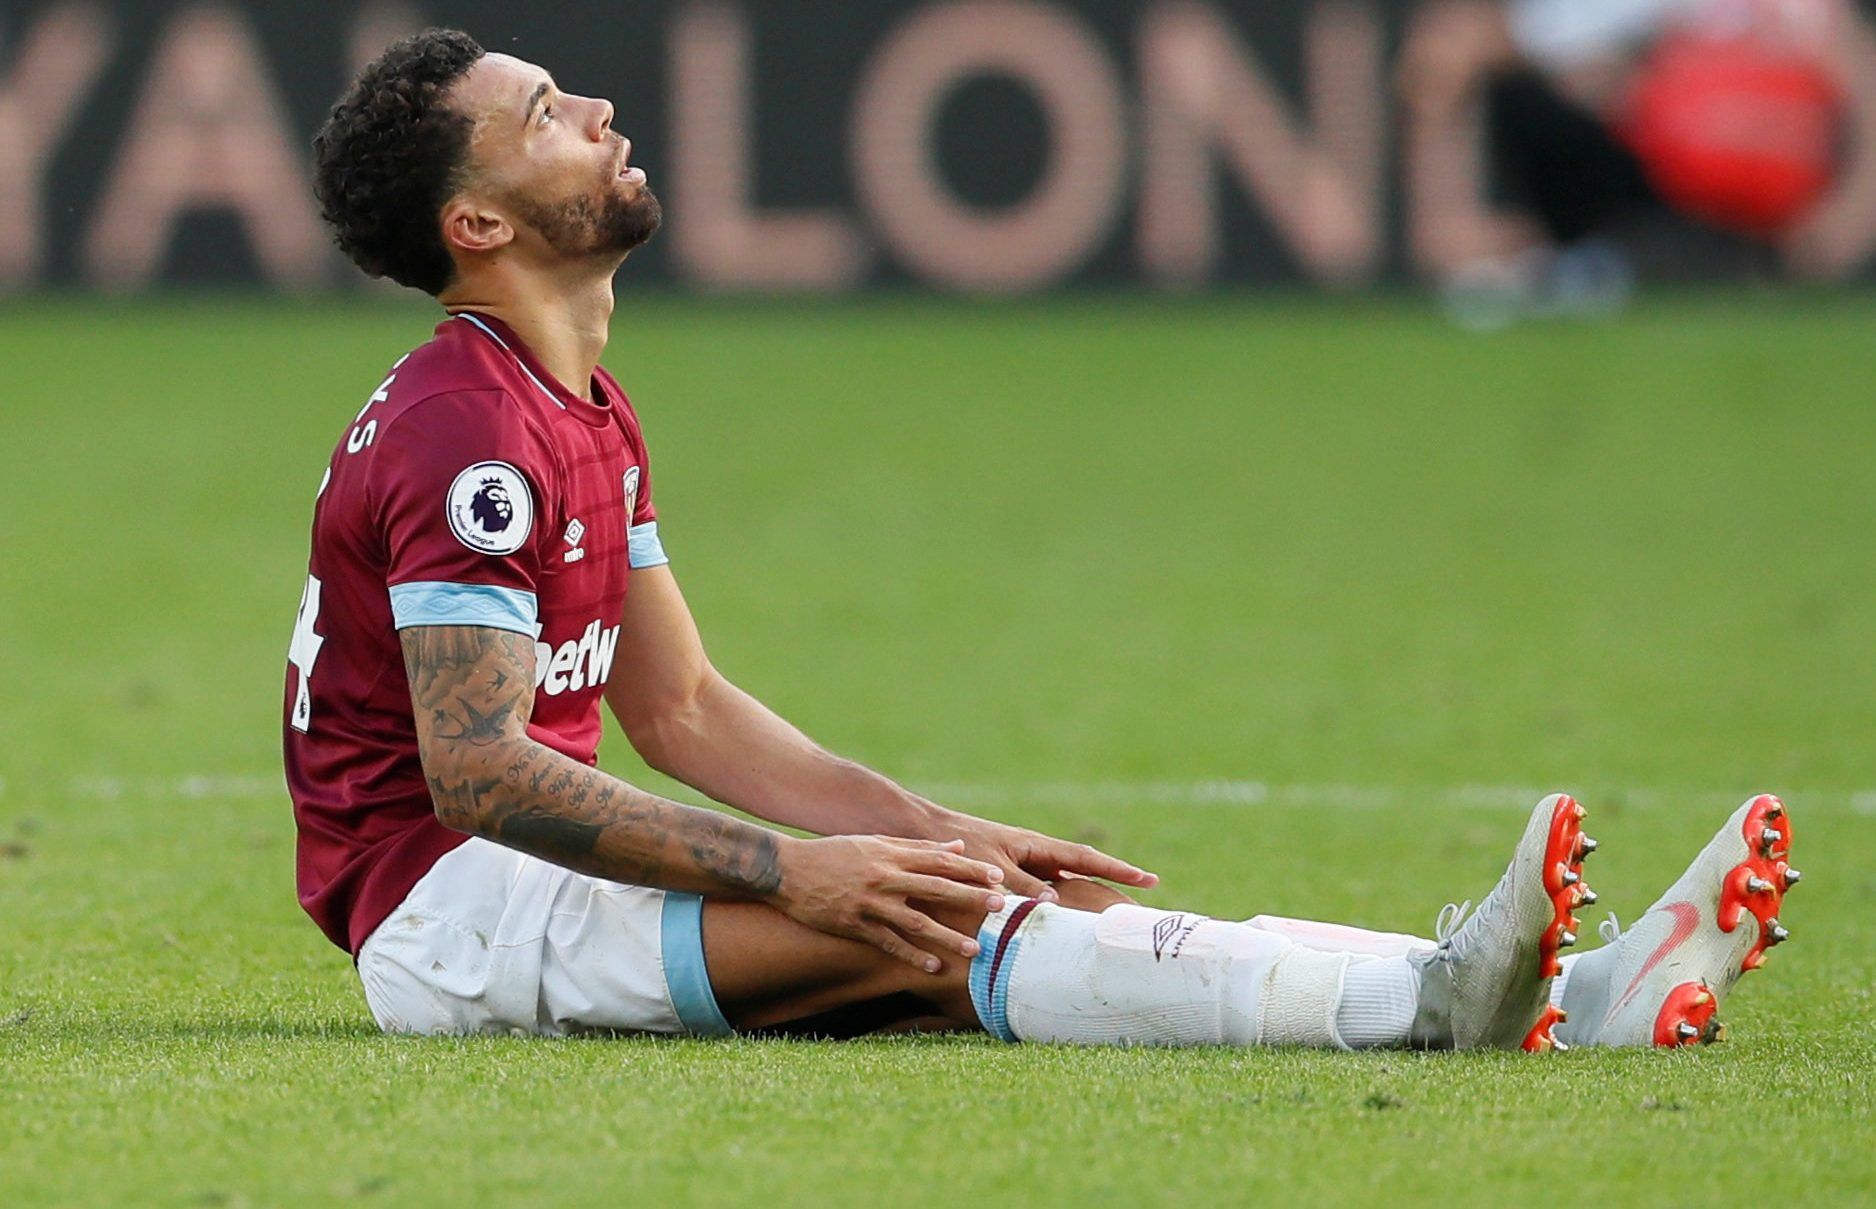 Soccer Football - Premier League - West Ham United v Wolverhampton Wanderers - London Stadium, London, Britain - September 1, 2018  West Ham's Ryan Fredericks reacts after the match                  REUTERS/David Klein  EDITORIAL USE ONLY. No use with unauthorized audio, video, data, fixture lists, club/league logos or 